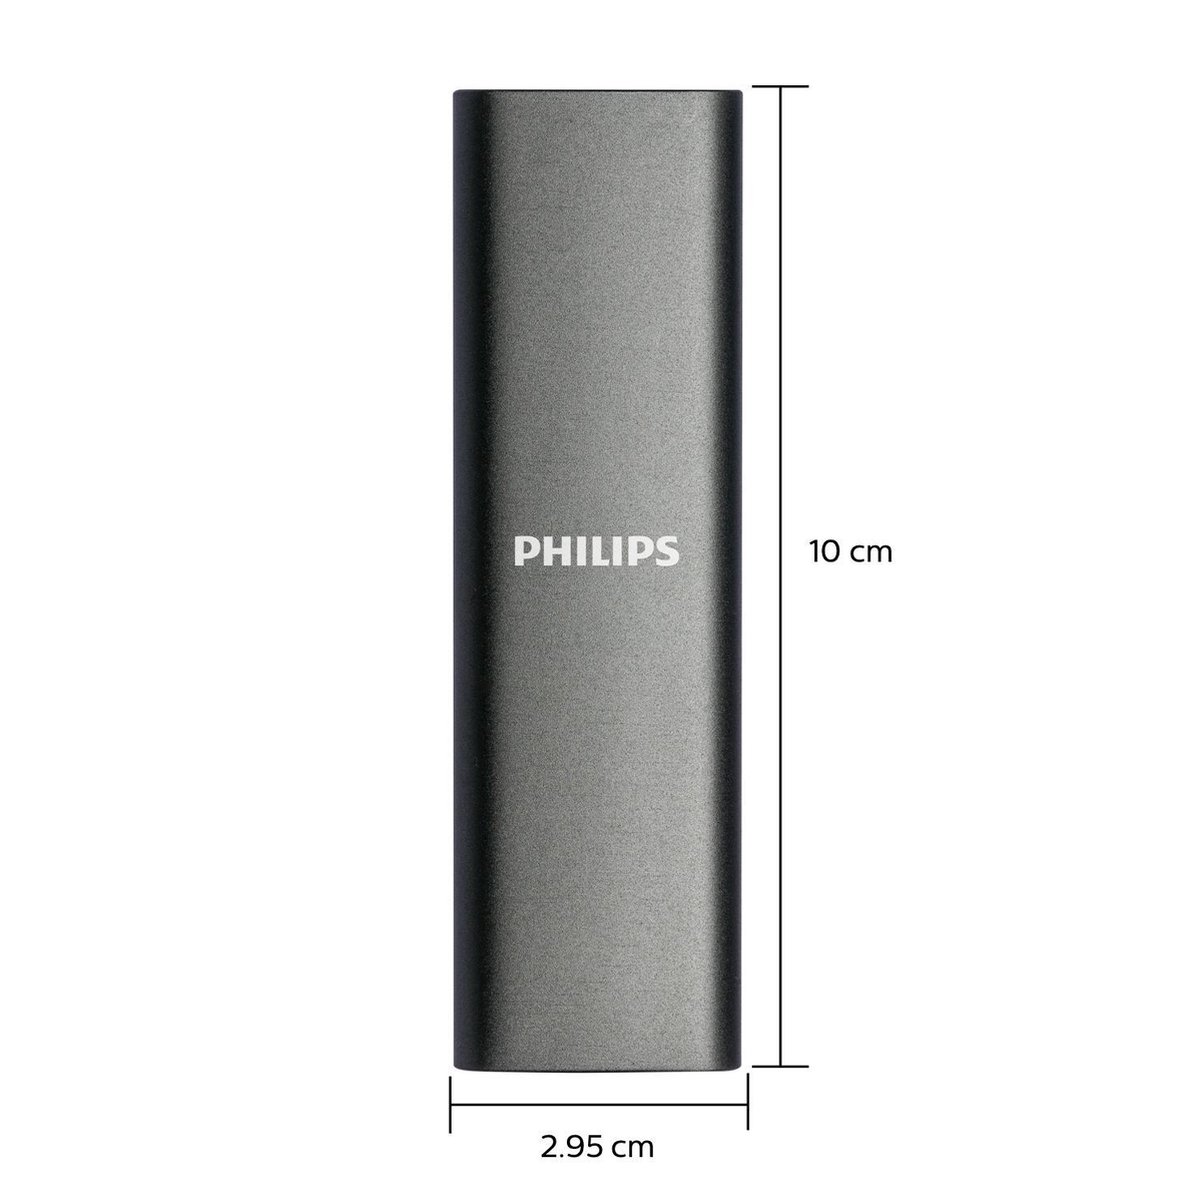 Philips External Portable SSD 256 GB Ultra Speed - Grey